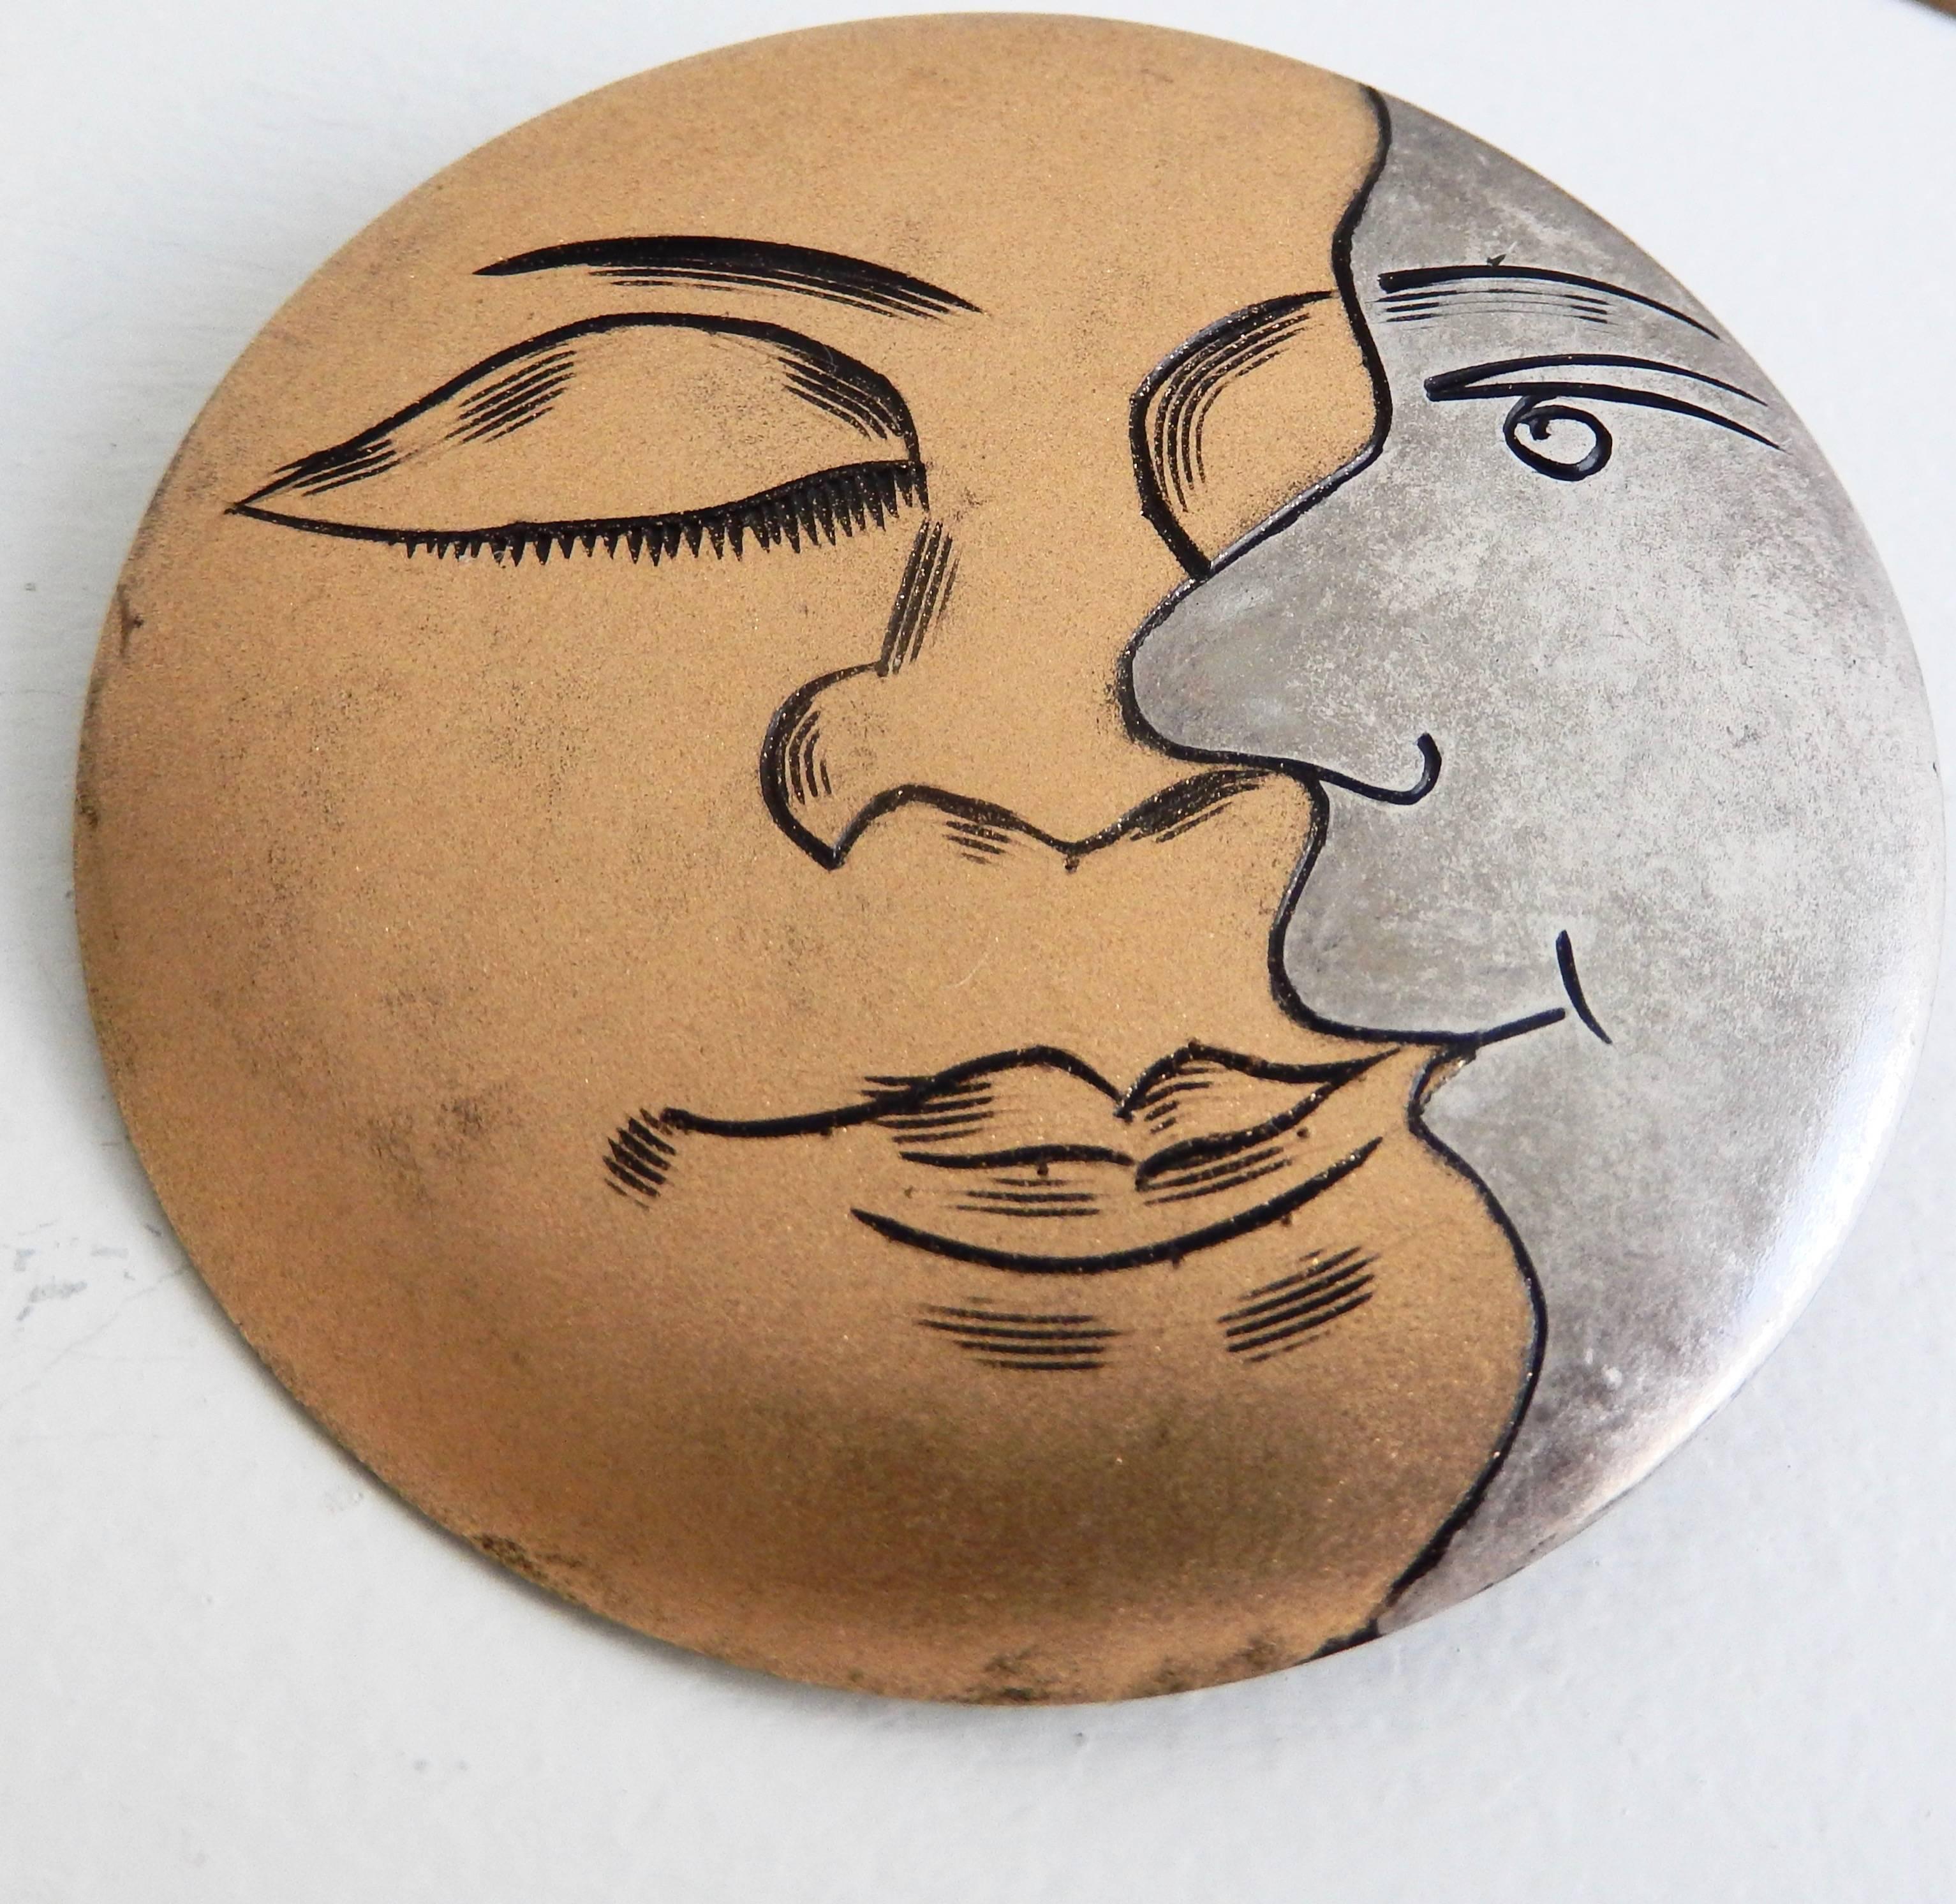 
Art Deco brooches of silver and gold gilt with a clever design of two faces--one in profile.  A sun and a son? Two sides of the man in the moon?  The witty graphic design is reminiscent of Fornasetti's stylized moon images.

Price is per item